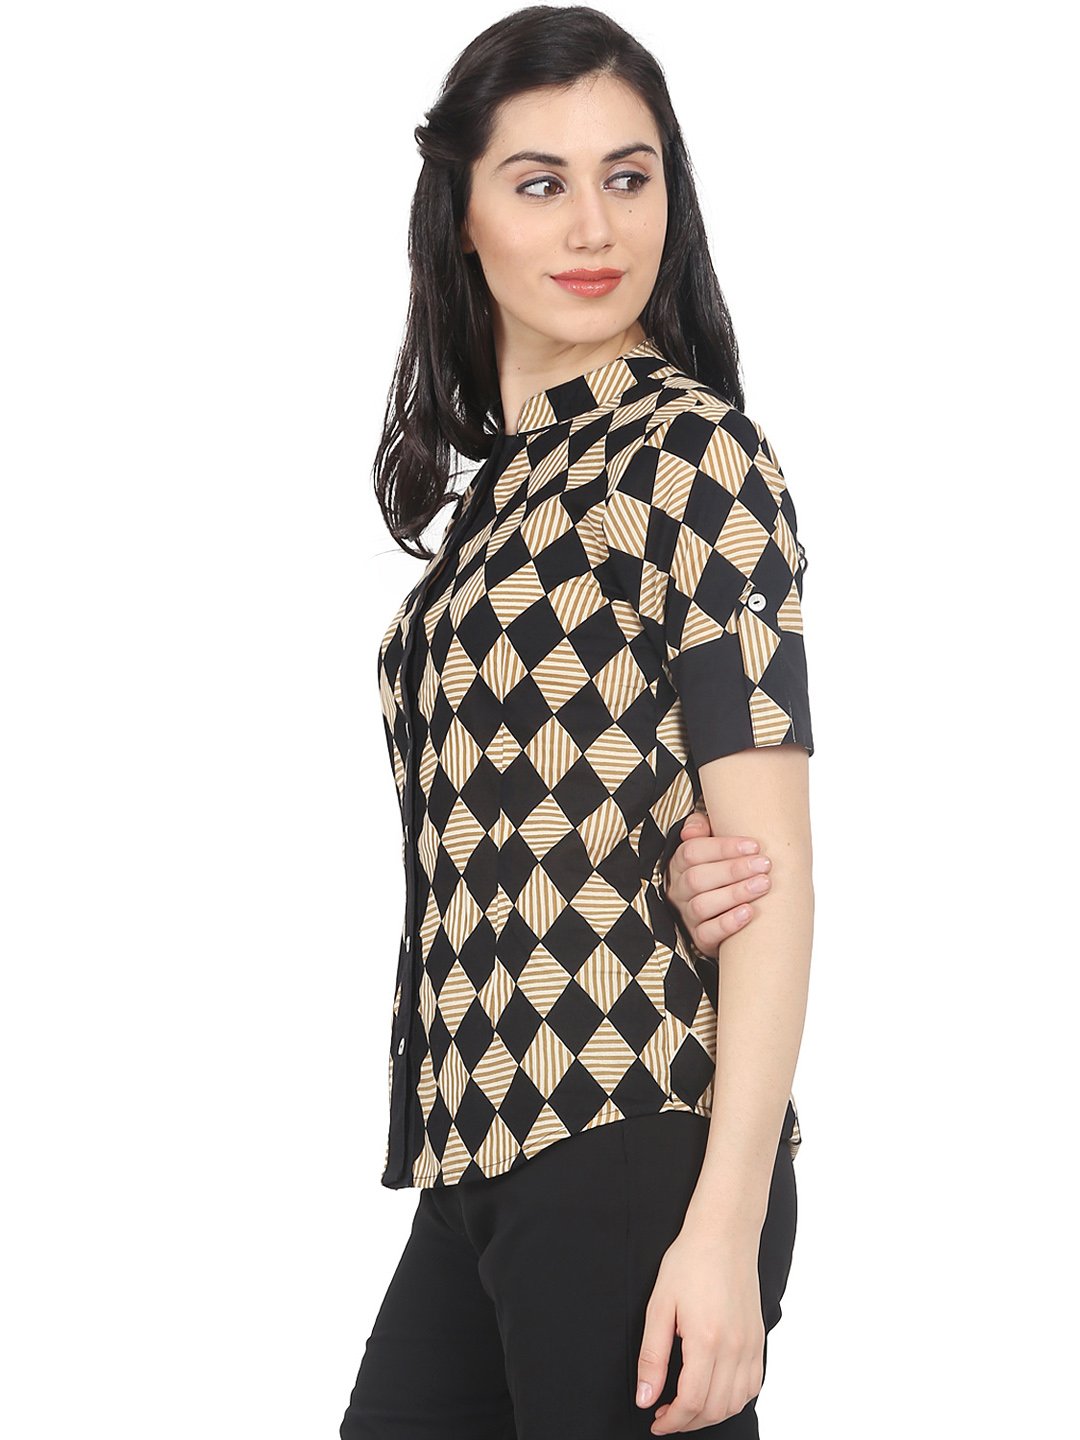 Women's Black & Beige Slim Fit Checked Casual Shirt - Nayo Clothing